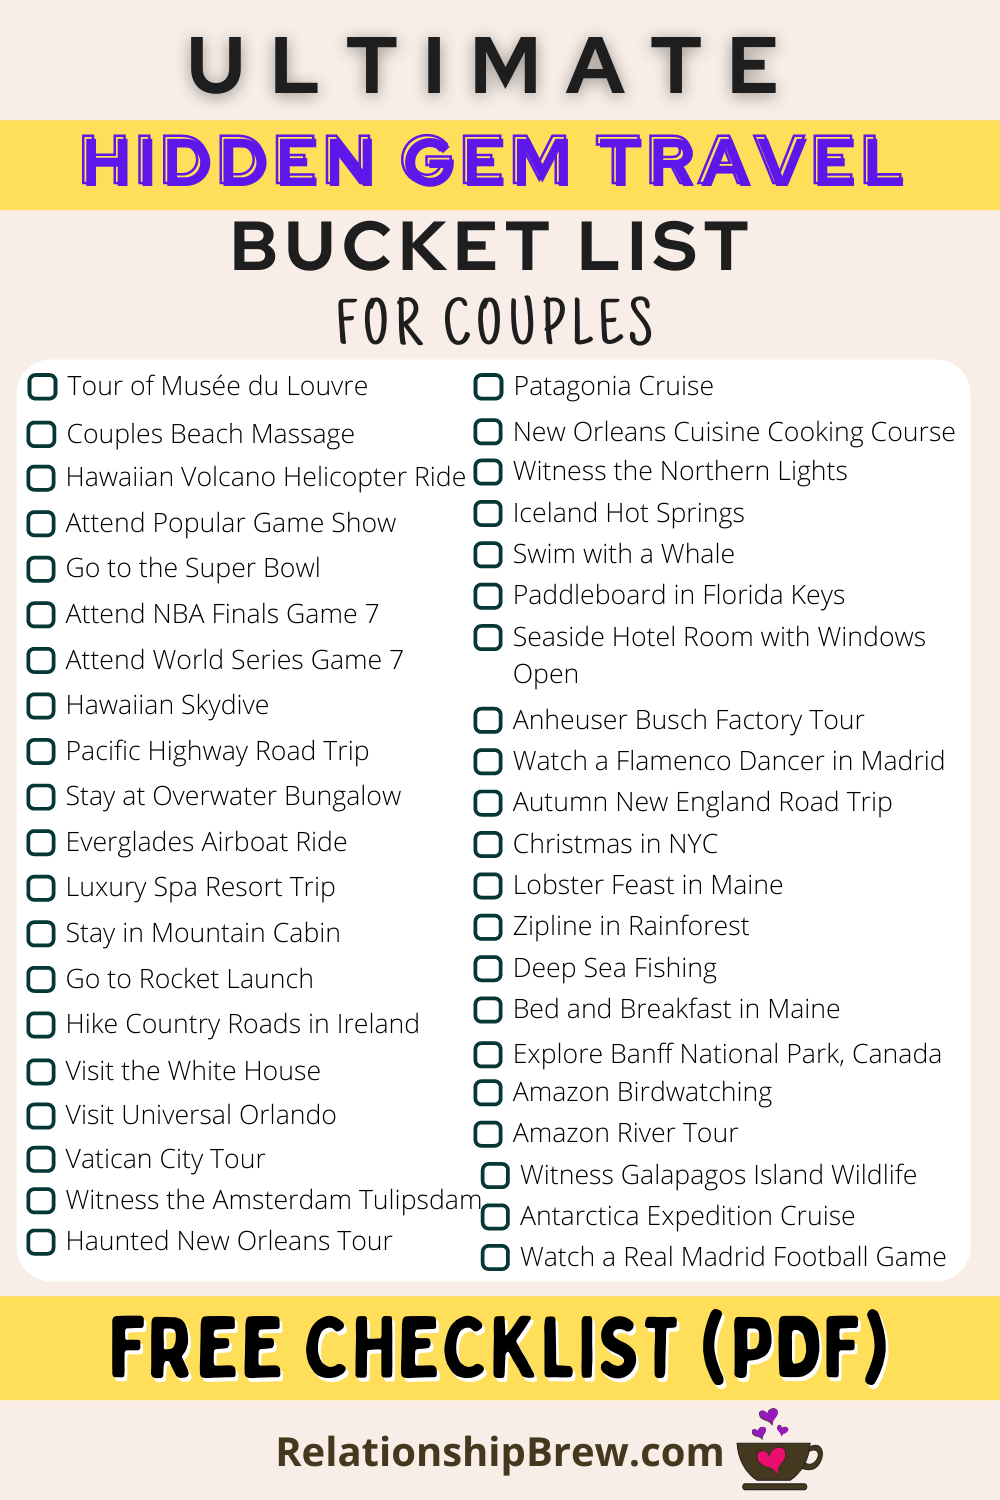 ultimate bucket list checklist for couples